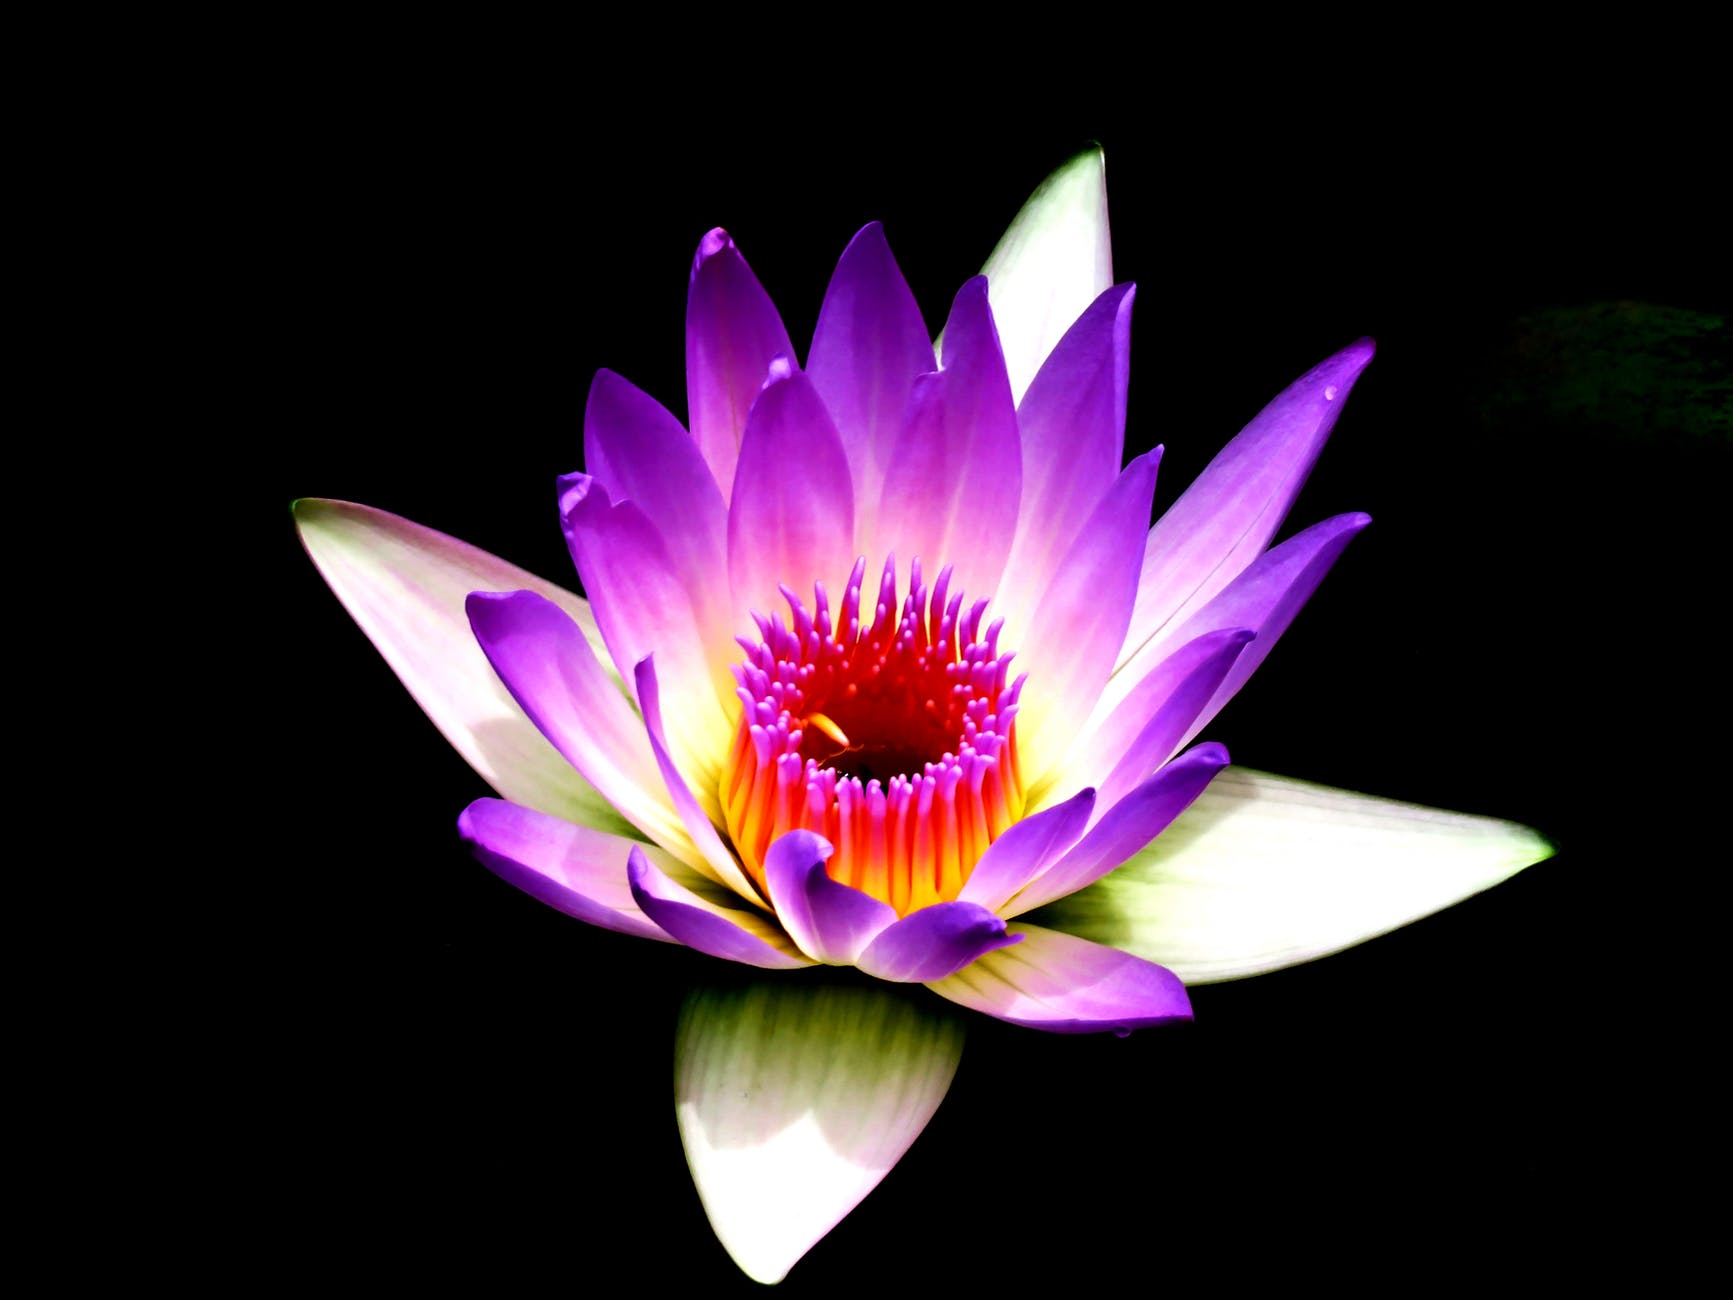 Purple and white lotus flower with red center and black background, to symbolize yoga and meditation class.